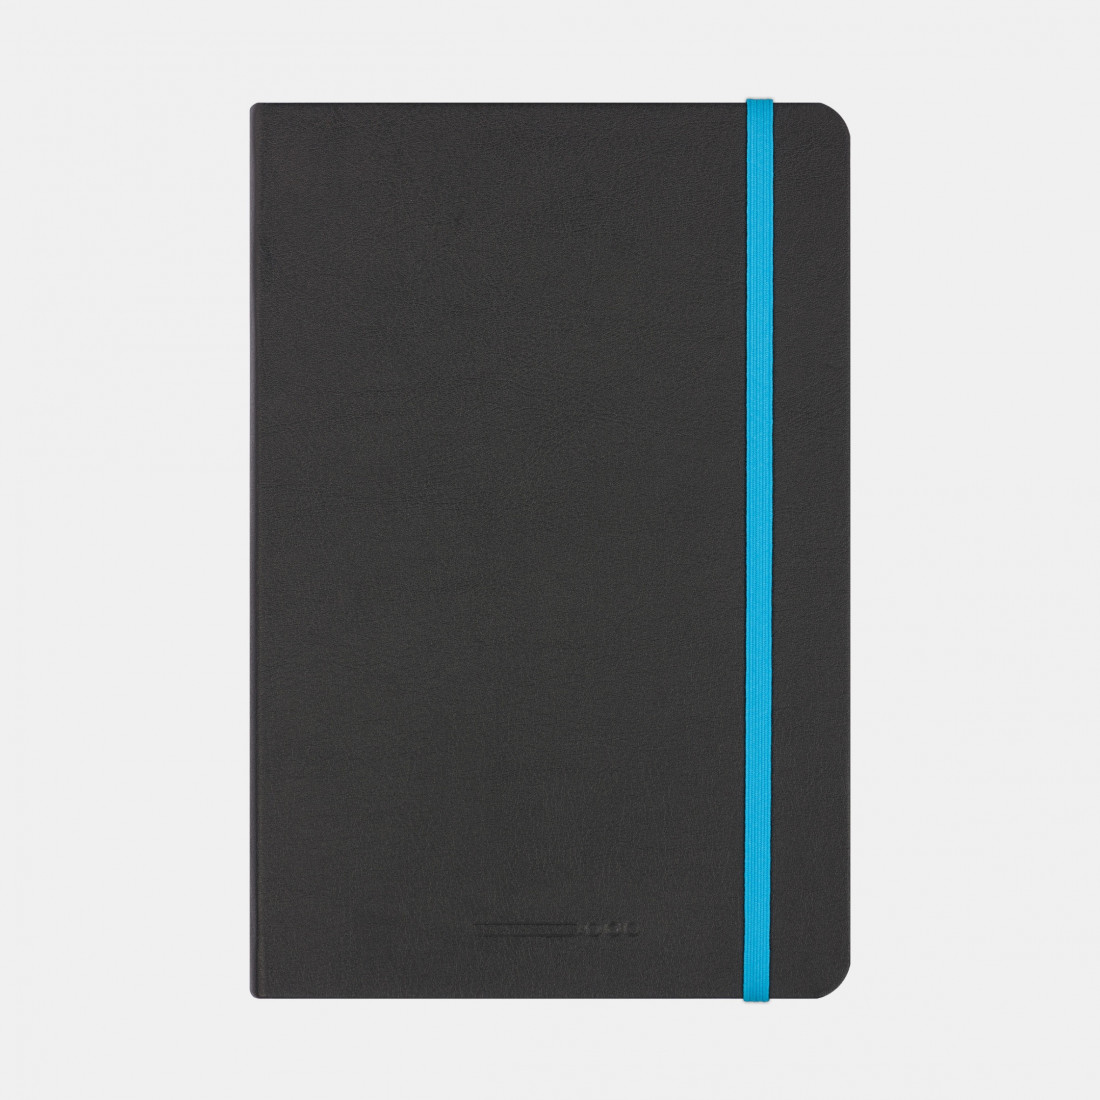 Endless notebook 15x21 black  squared with 68 gsm Tomoe River paper